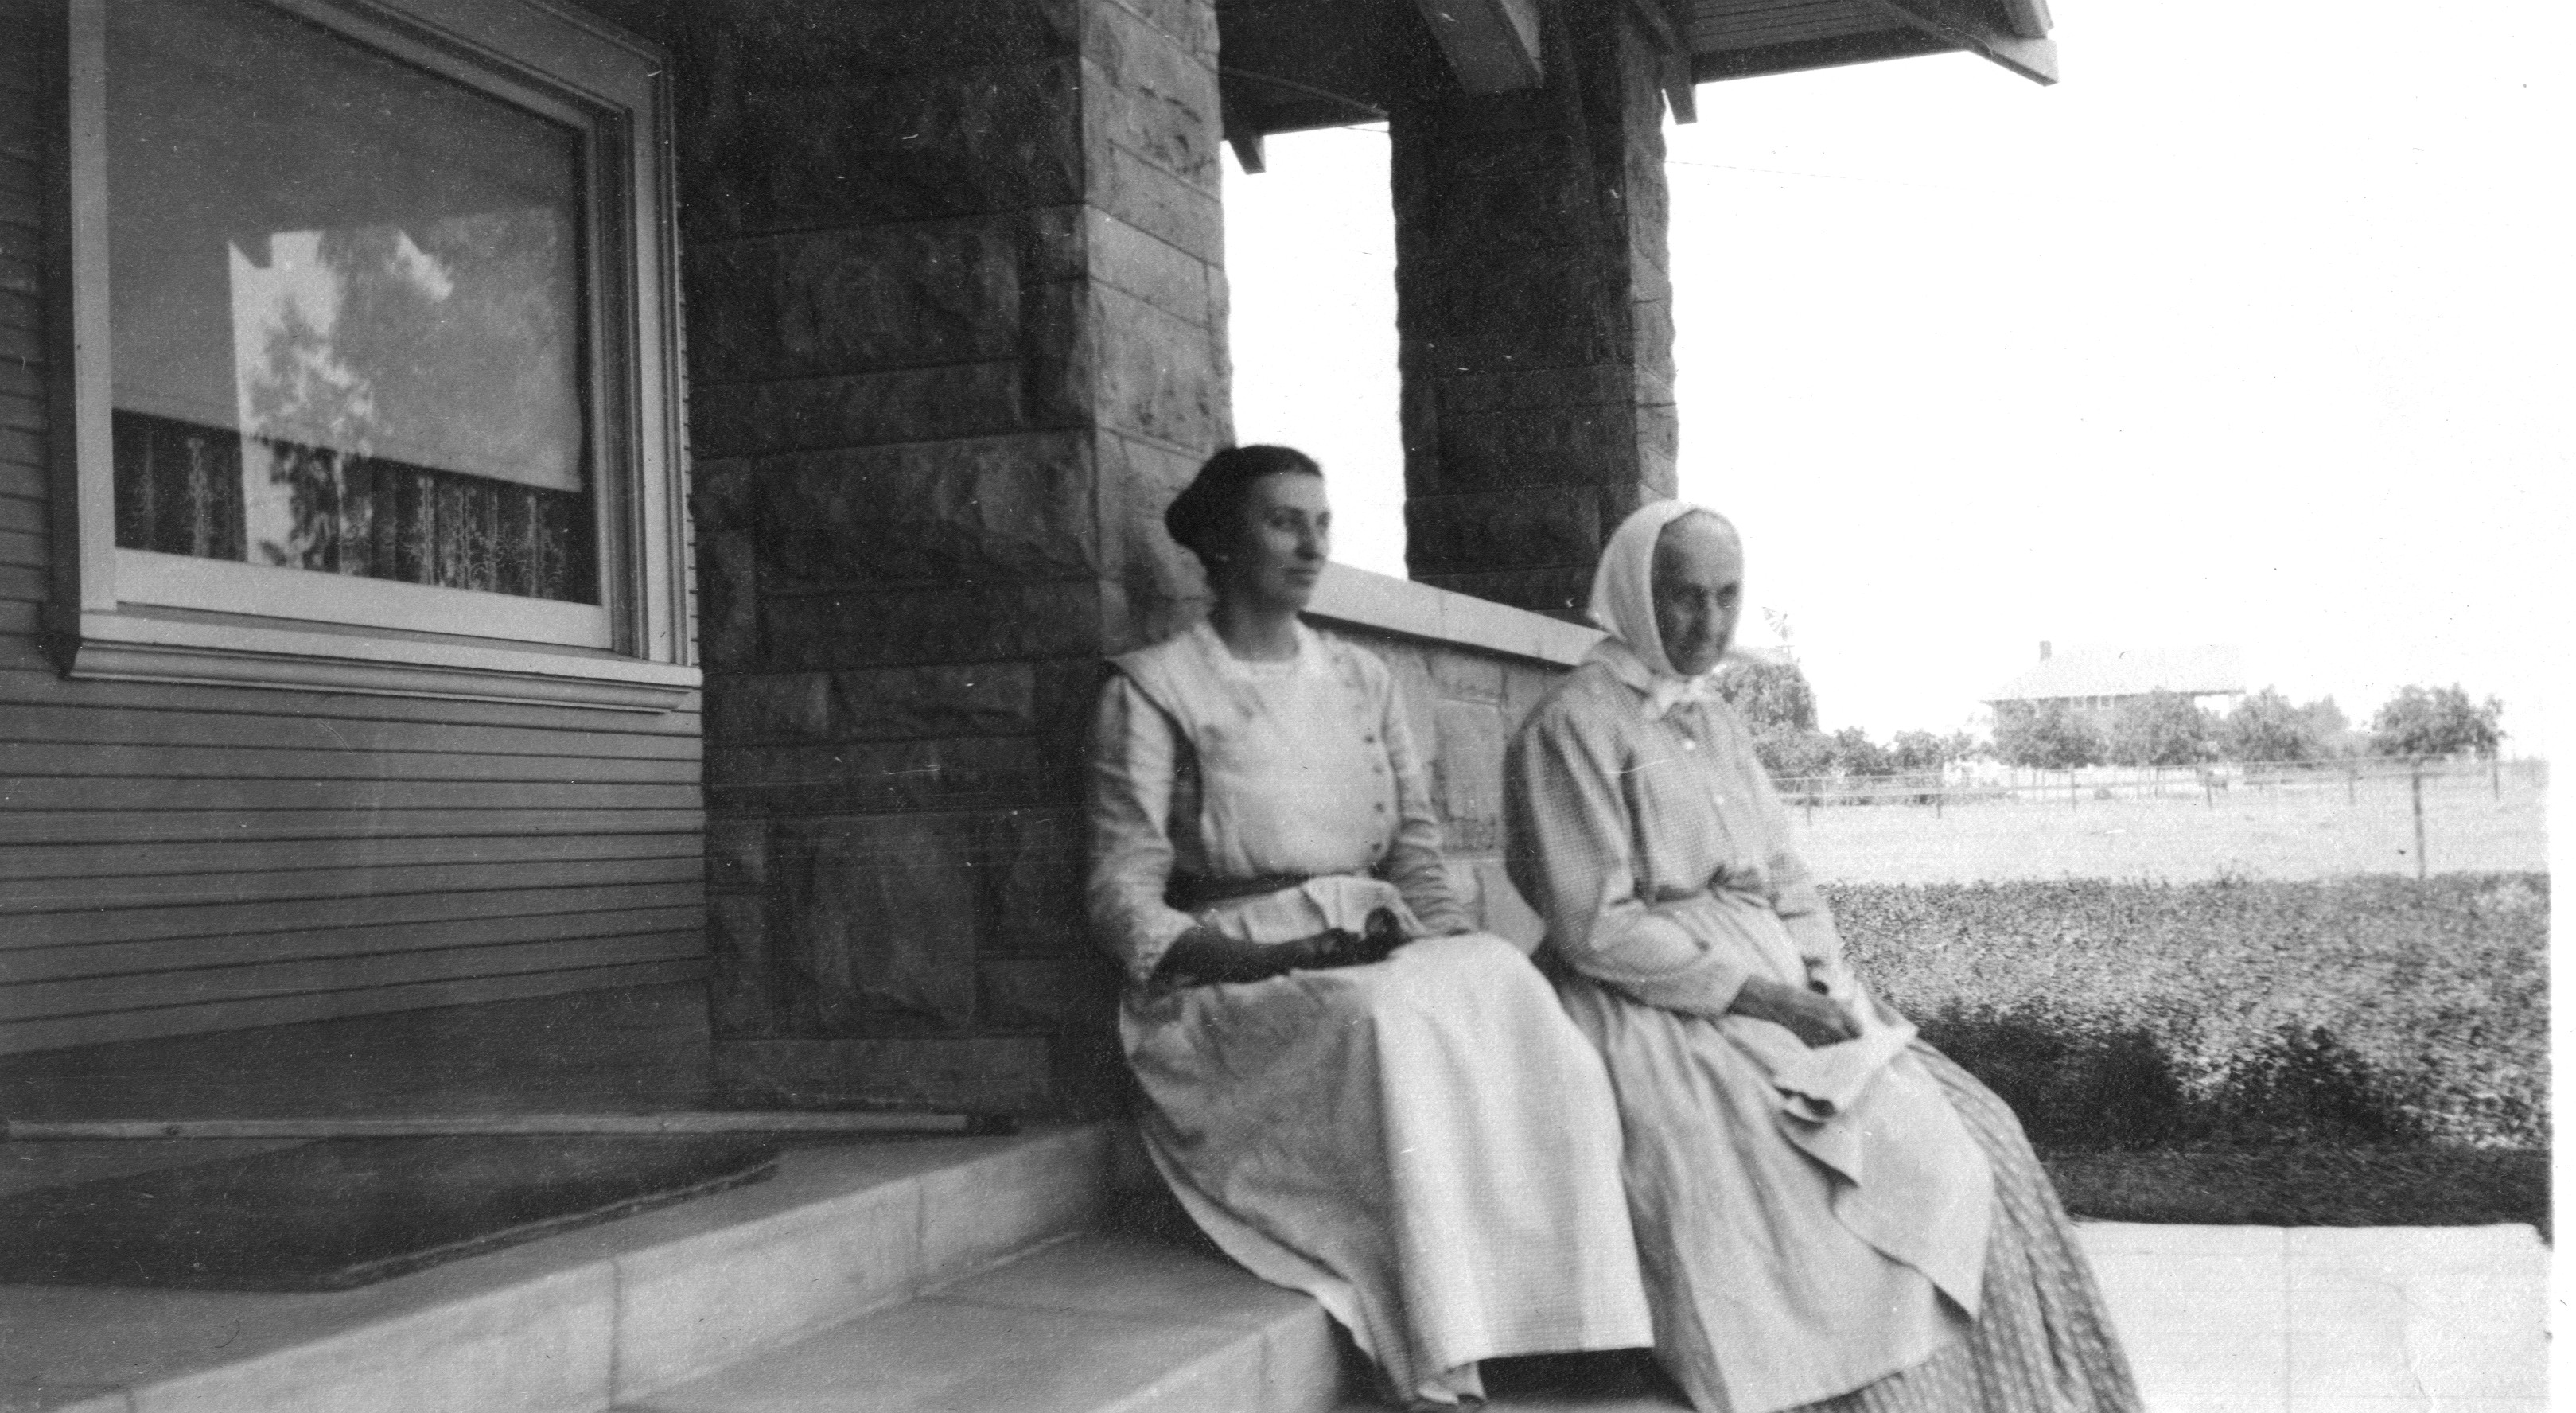 Anna (Thill) Wagner and her mother Margaret (Wagner) Hittenger on the front steps of her home on Manchester Blvd and Normandy Ave.  Looking west about two blocks was John Wagner and Anna (Wagner) Thill brother's home, Michael Wagner.  His house and barns were at the corner of Manchester Blvd. and Denker Ave.